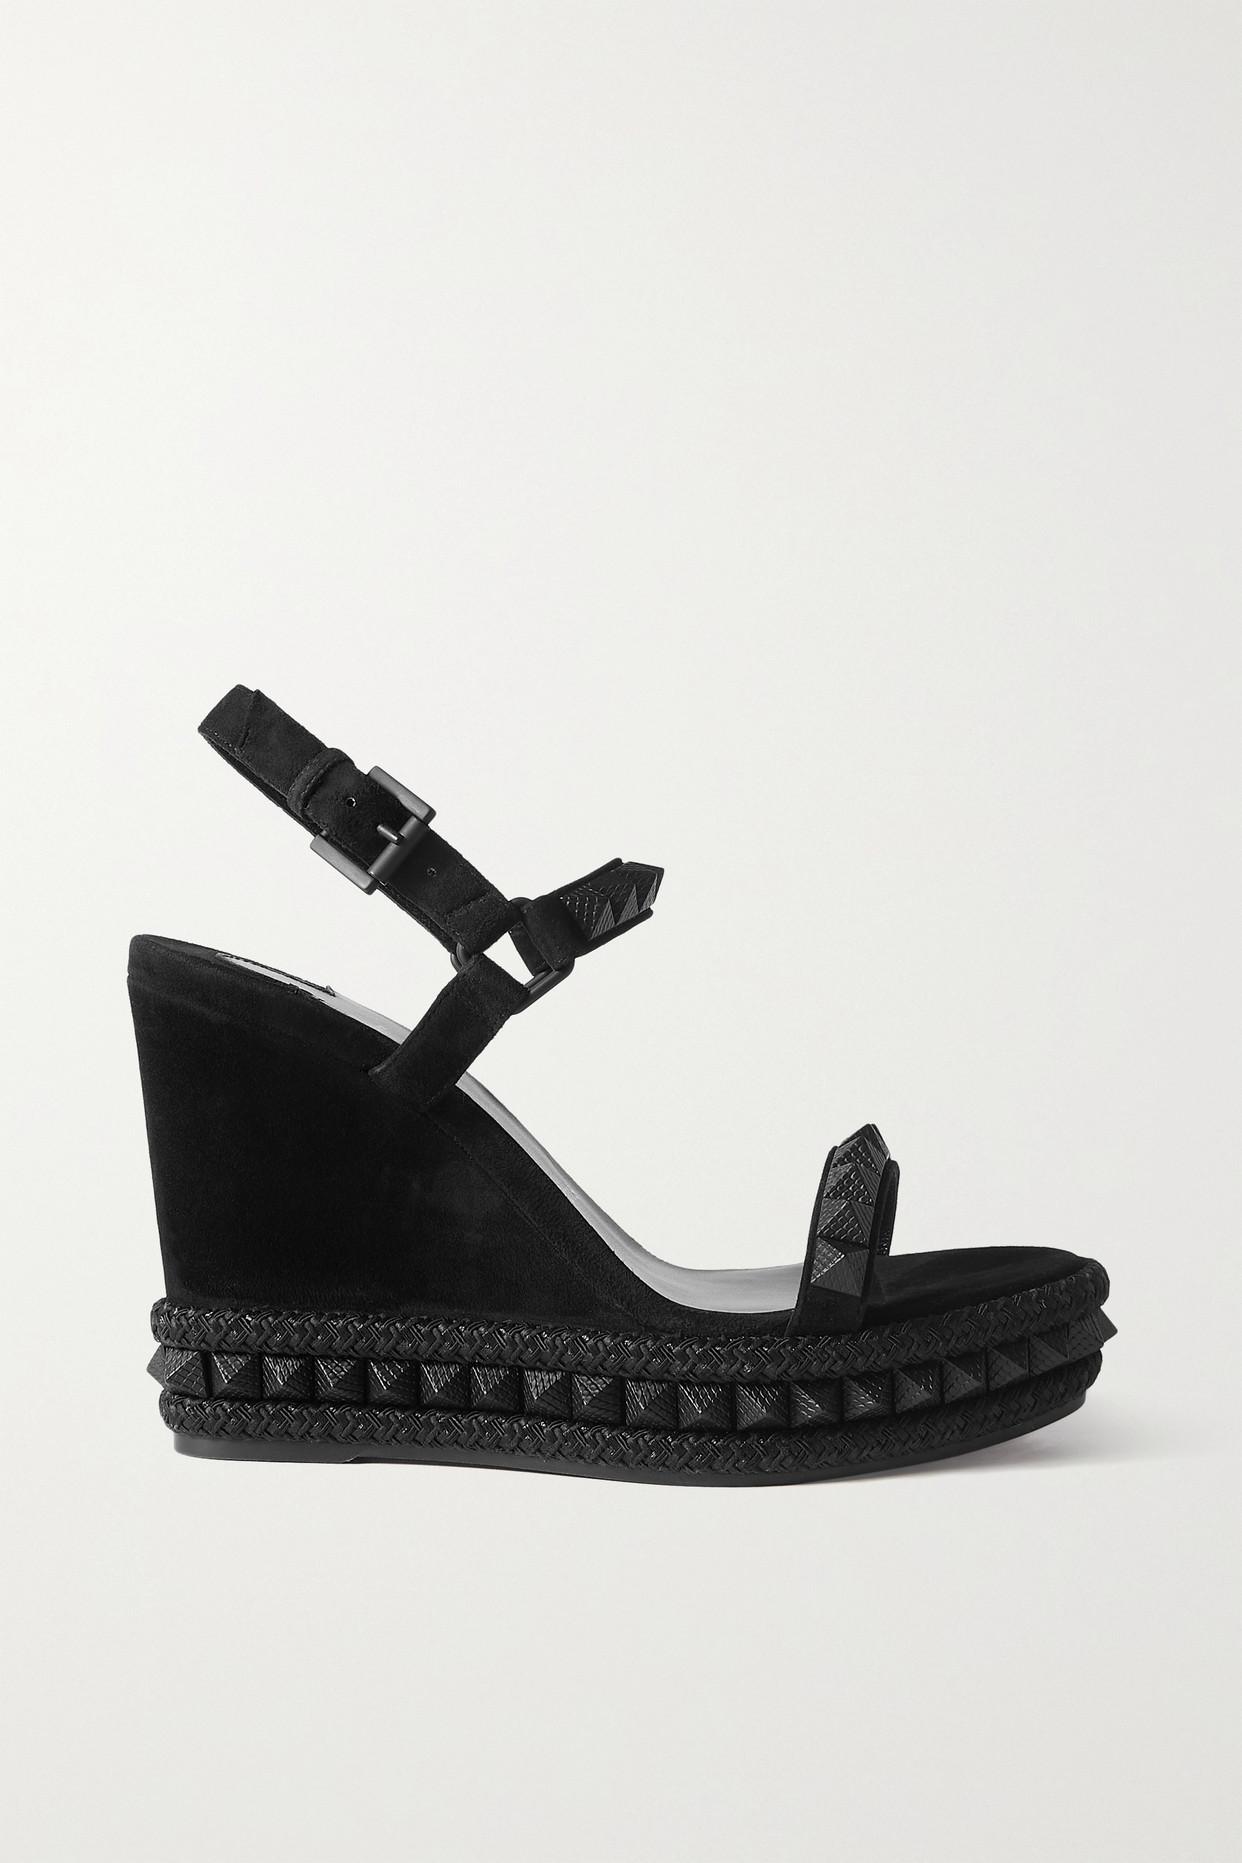 Christian Louboutin Pyraclou 110 Studded Velvet And Leather Wedge Sandals  in Black | Lyst